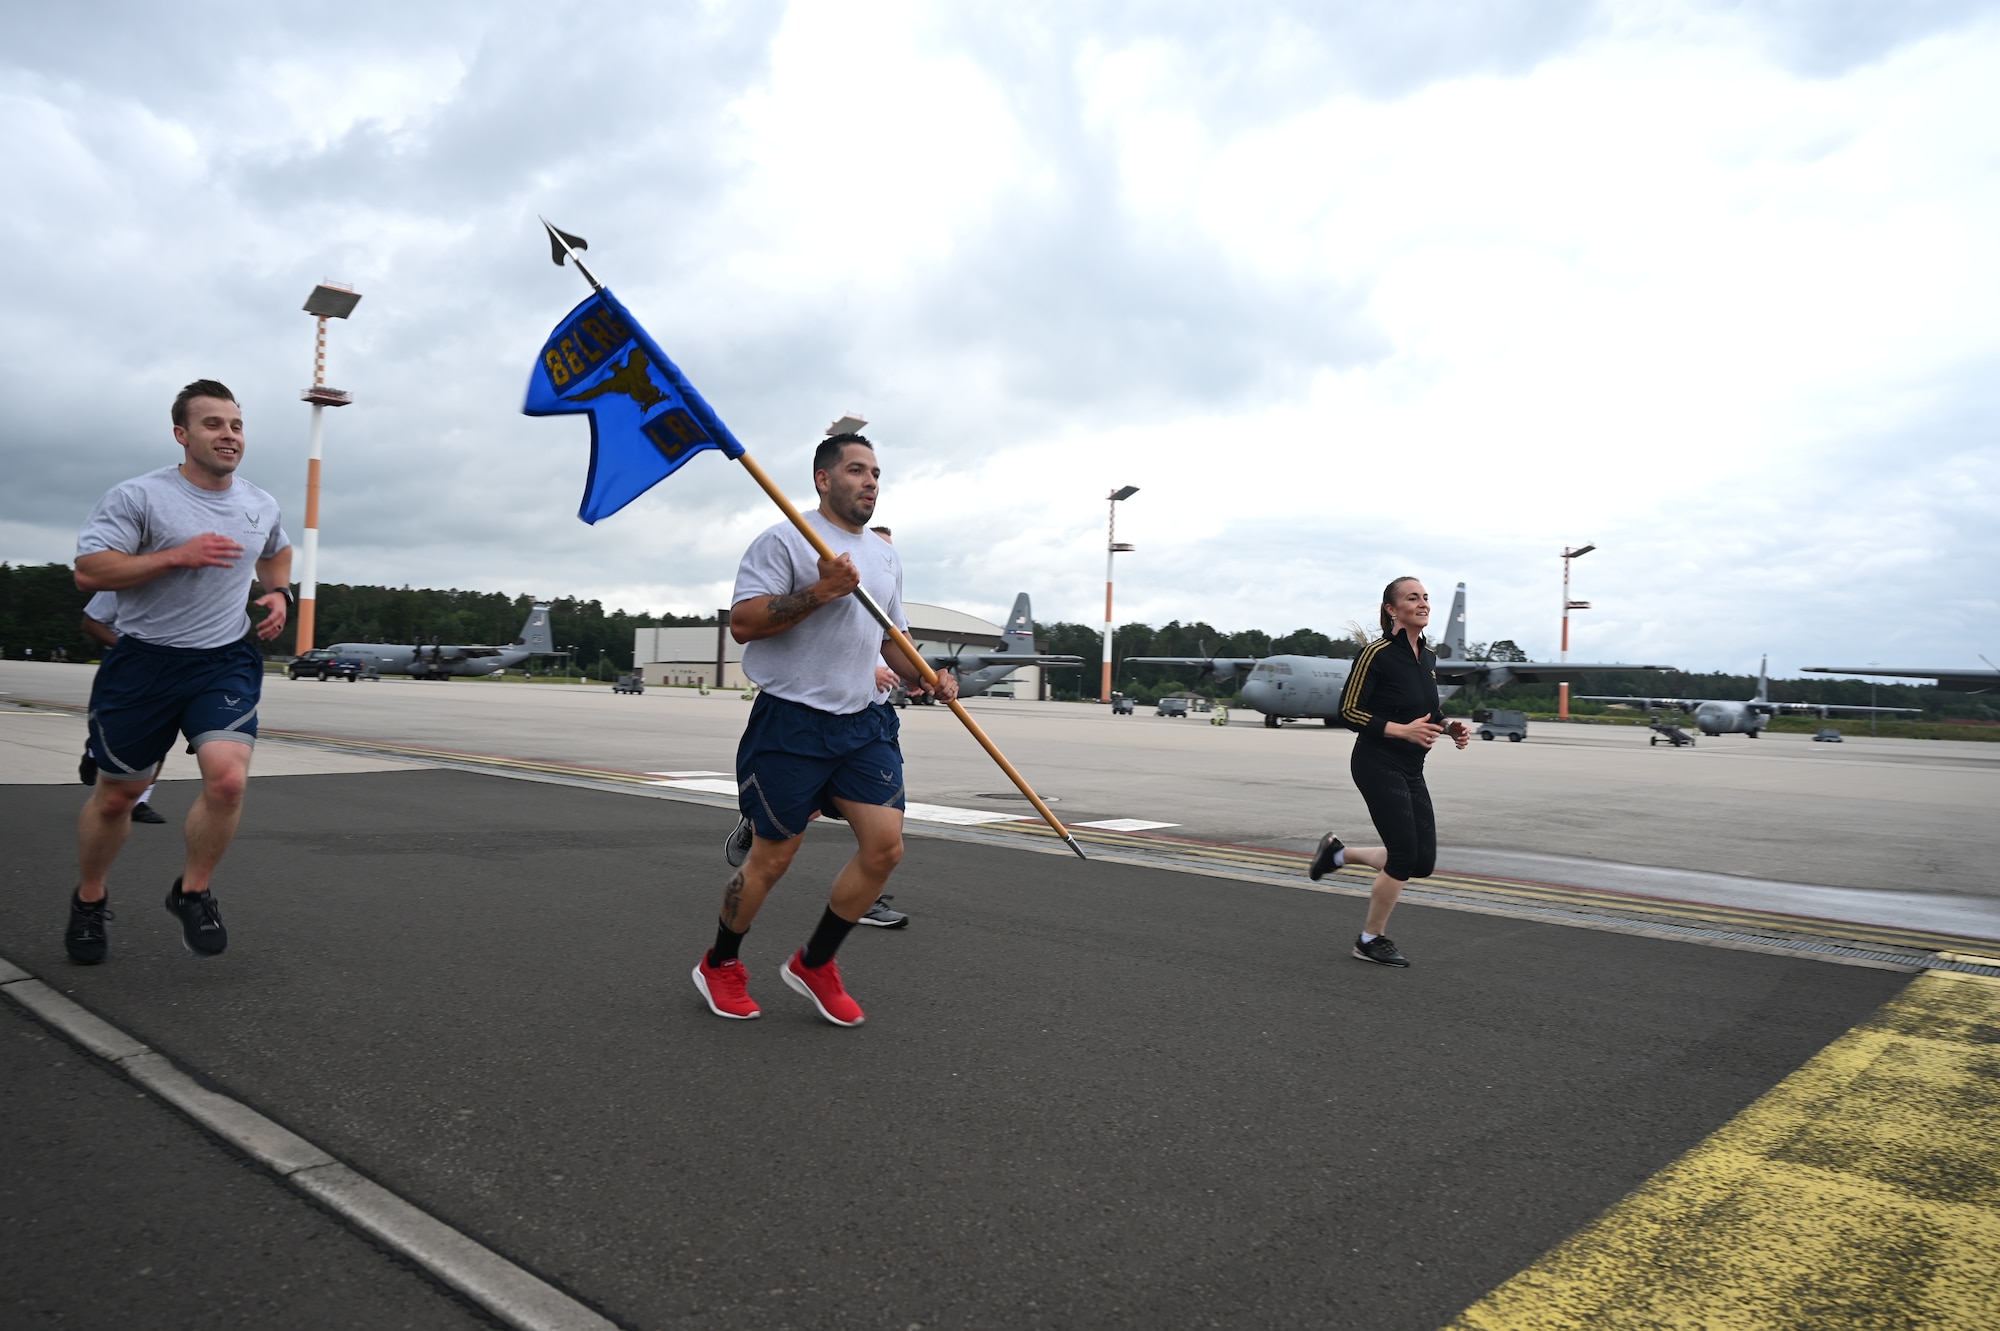 U.S. Air Force Airmen run past a pair of C-130 Hercules aircrafts during the RUNway 5K at Ramstein Air Base, Germany, July 1, 2021. Every Squadron from the 86th Airlift Wing participated in the RUNway 5K as a way to promote a healthy and fit force. (U.S. Air Force photo by Senior Airman Thomas Karol)